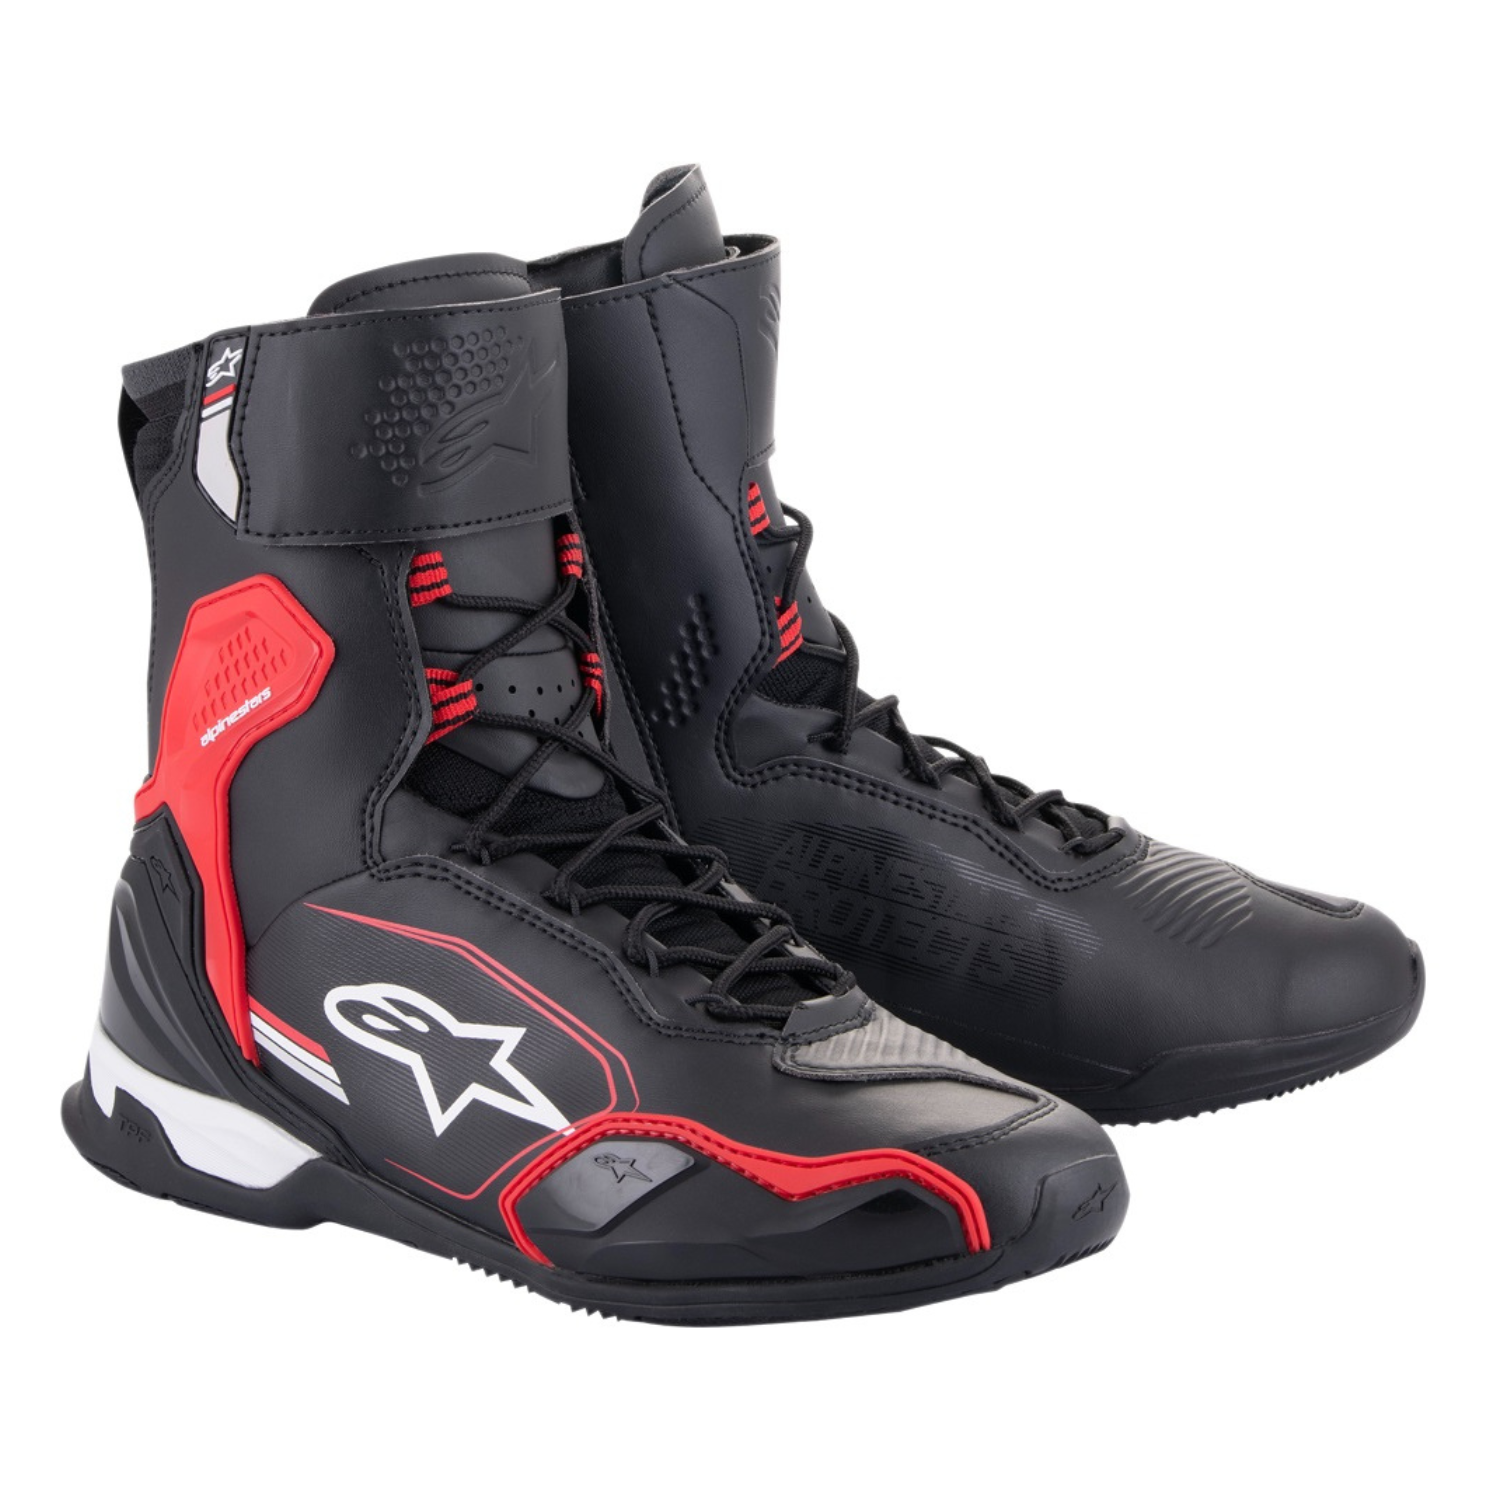 Image of Alpinestars Superfaster Shoes Black Bright Red White Talla US 115